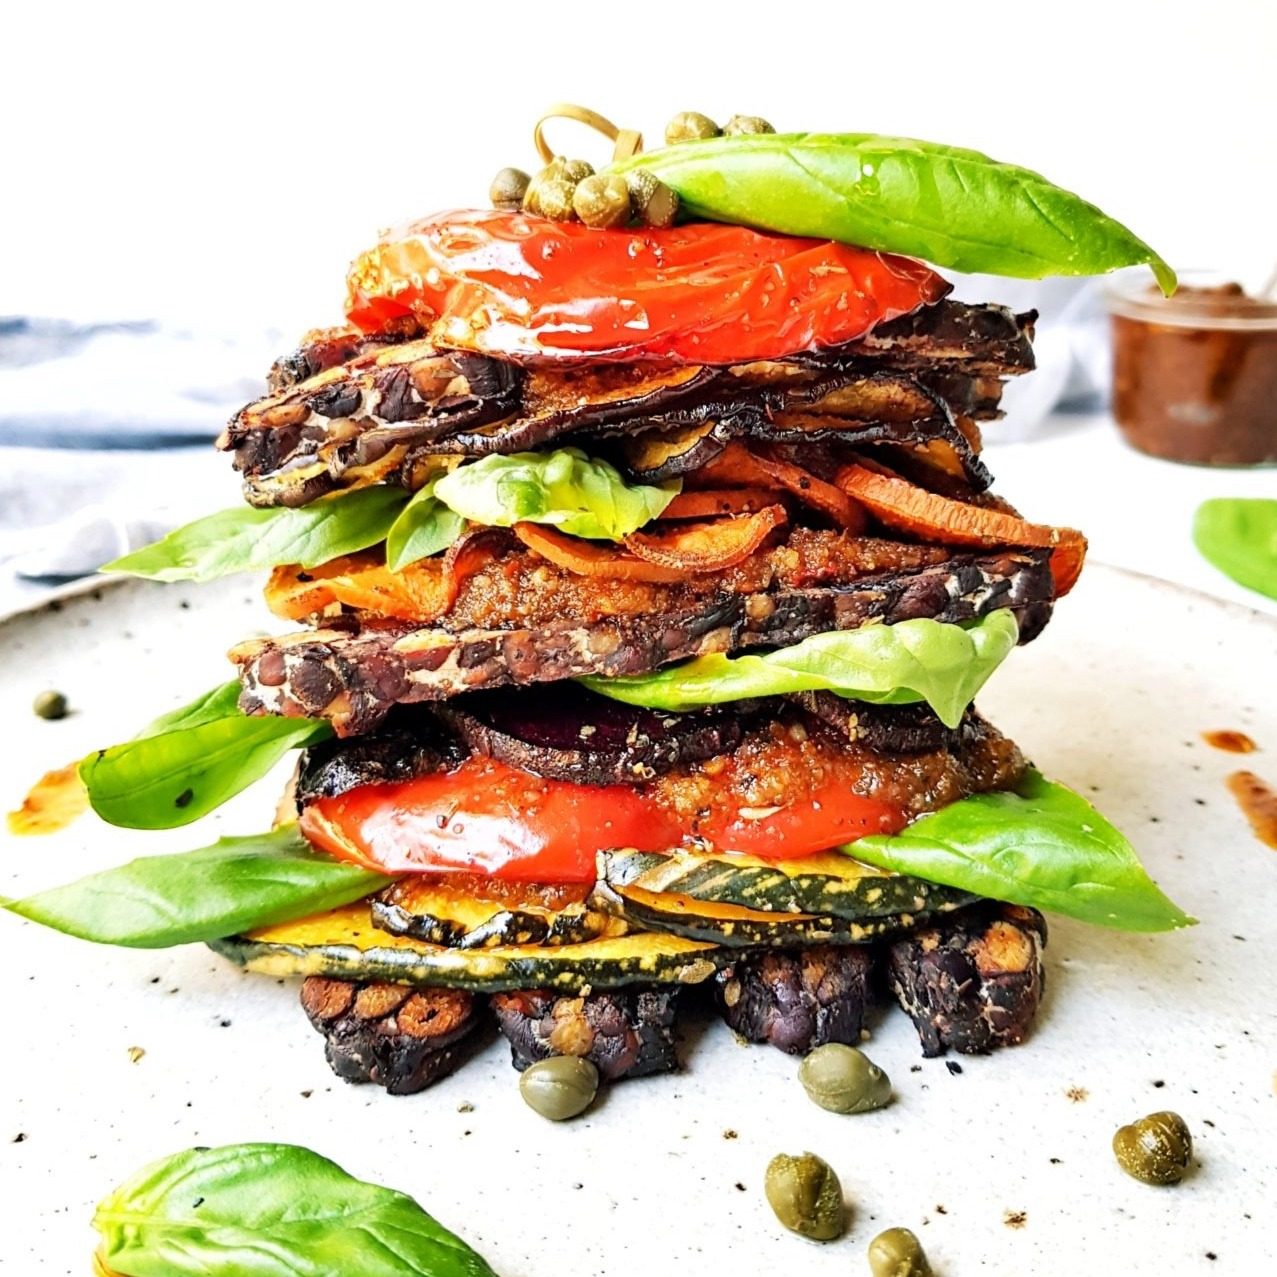 Adzuki bean tempeh and vegetable stack by Simon Hill